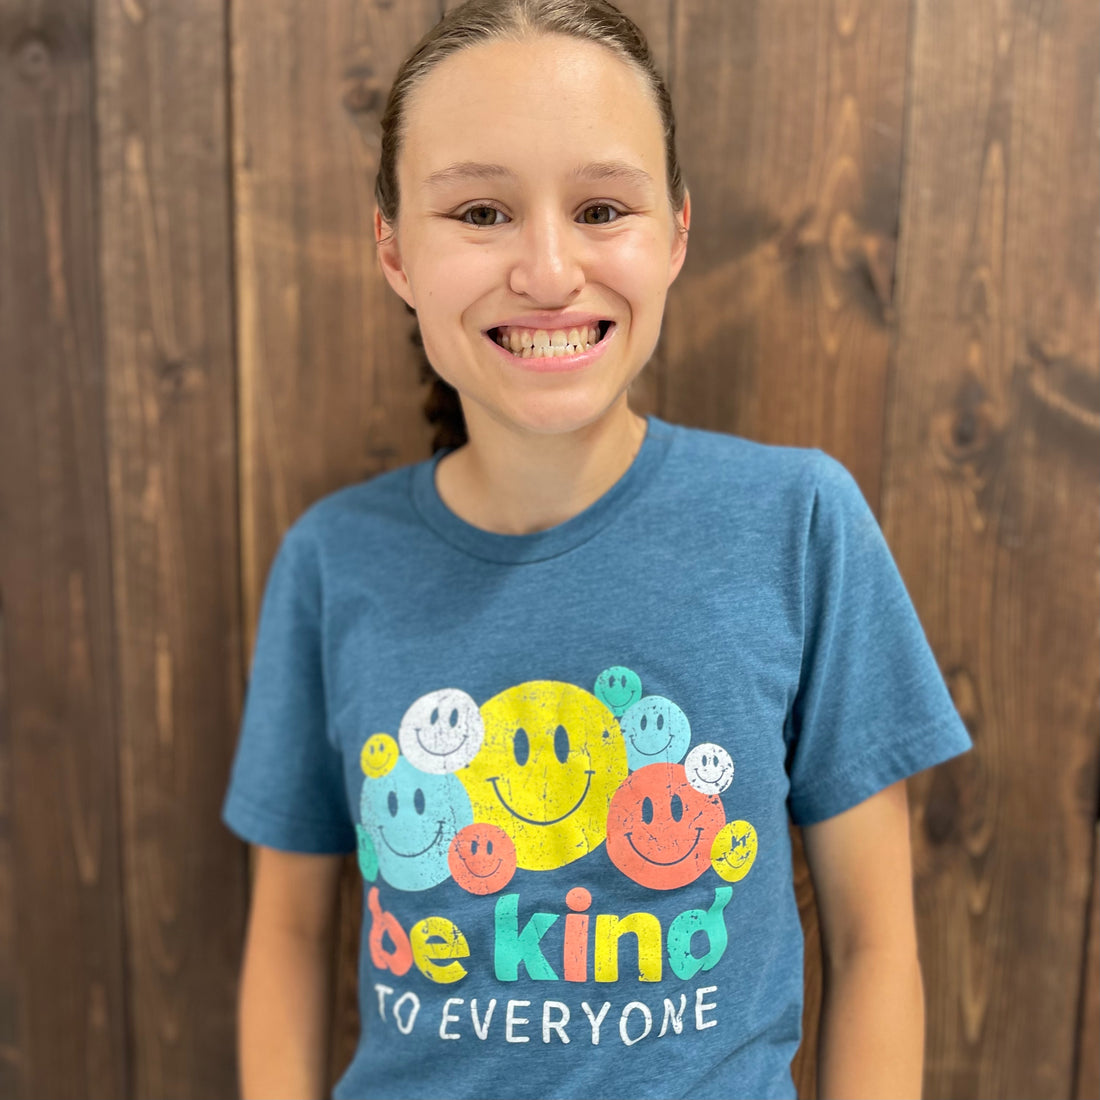 Jordyn, modeling a small in our Smiley Be Kind to Everyone® short-sleeved t-shirt.